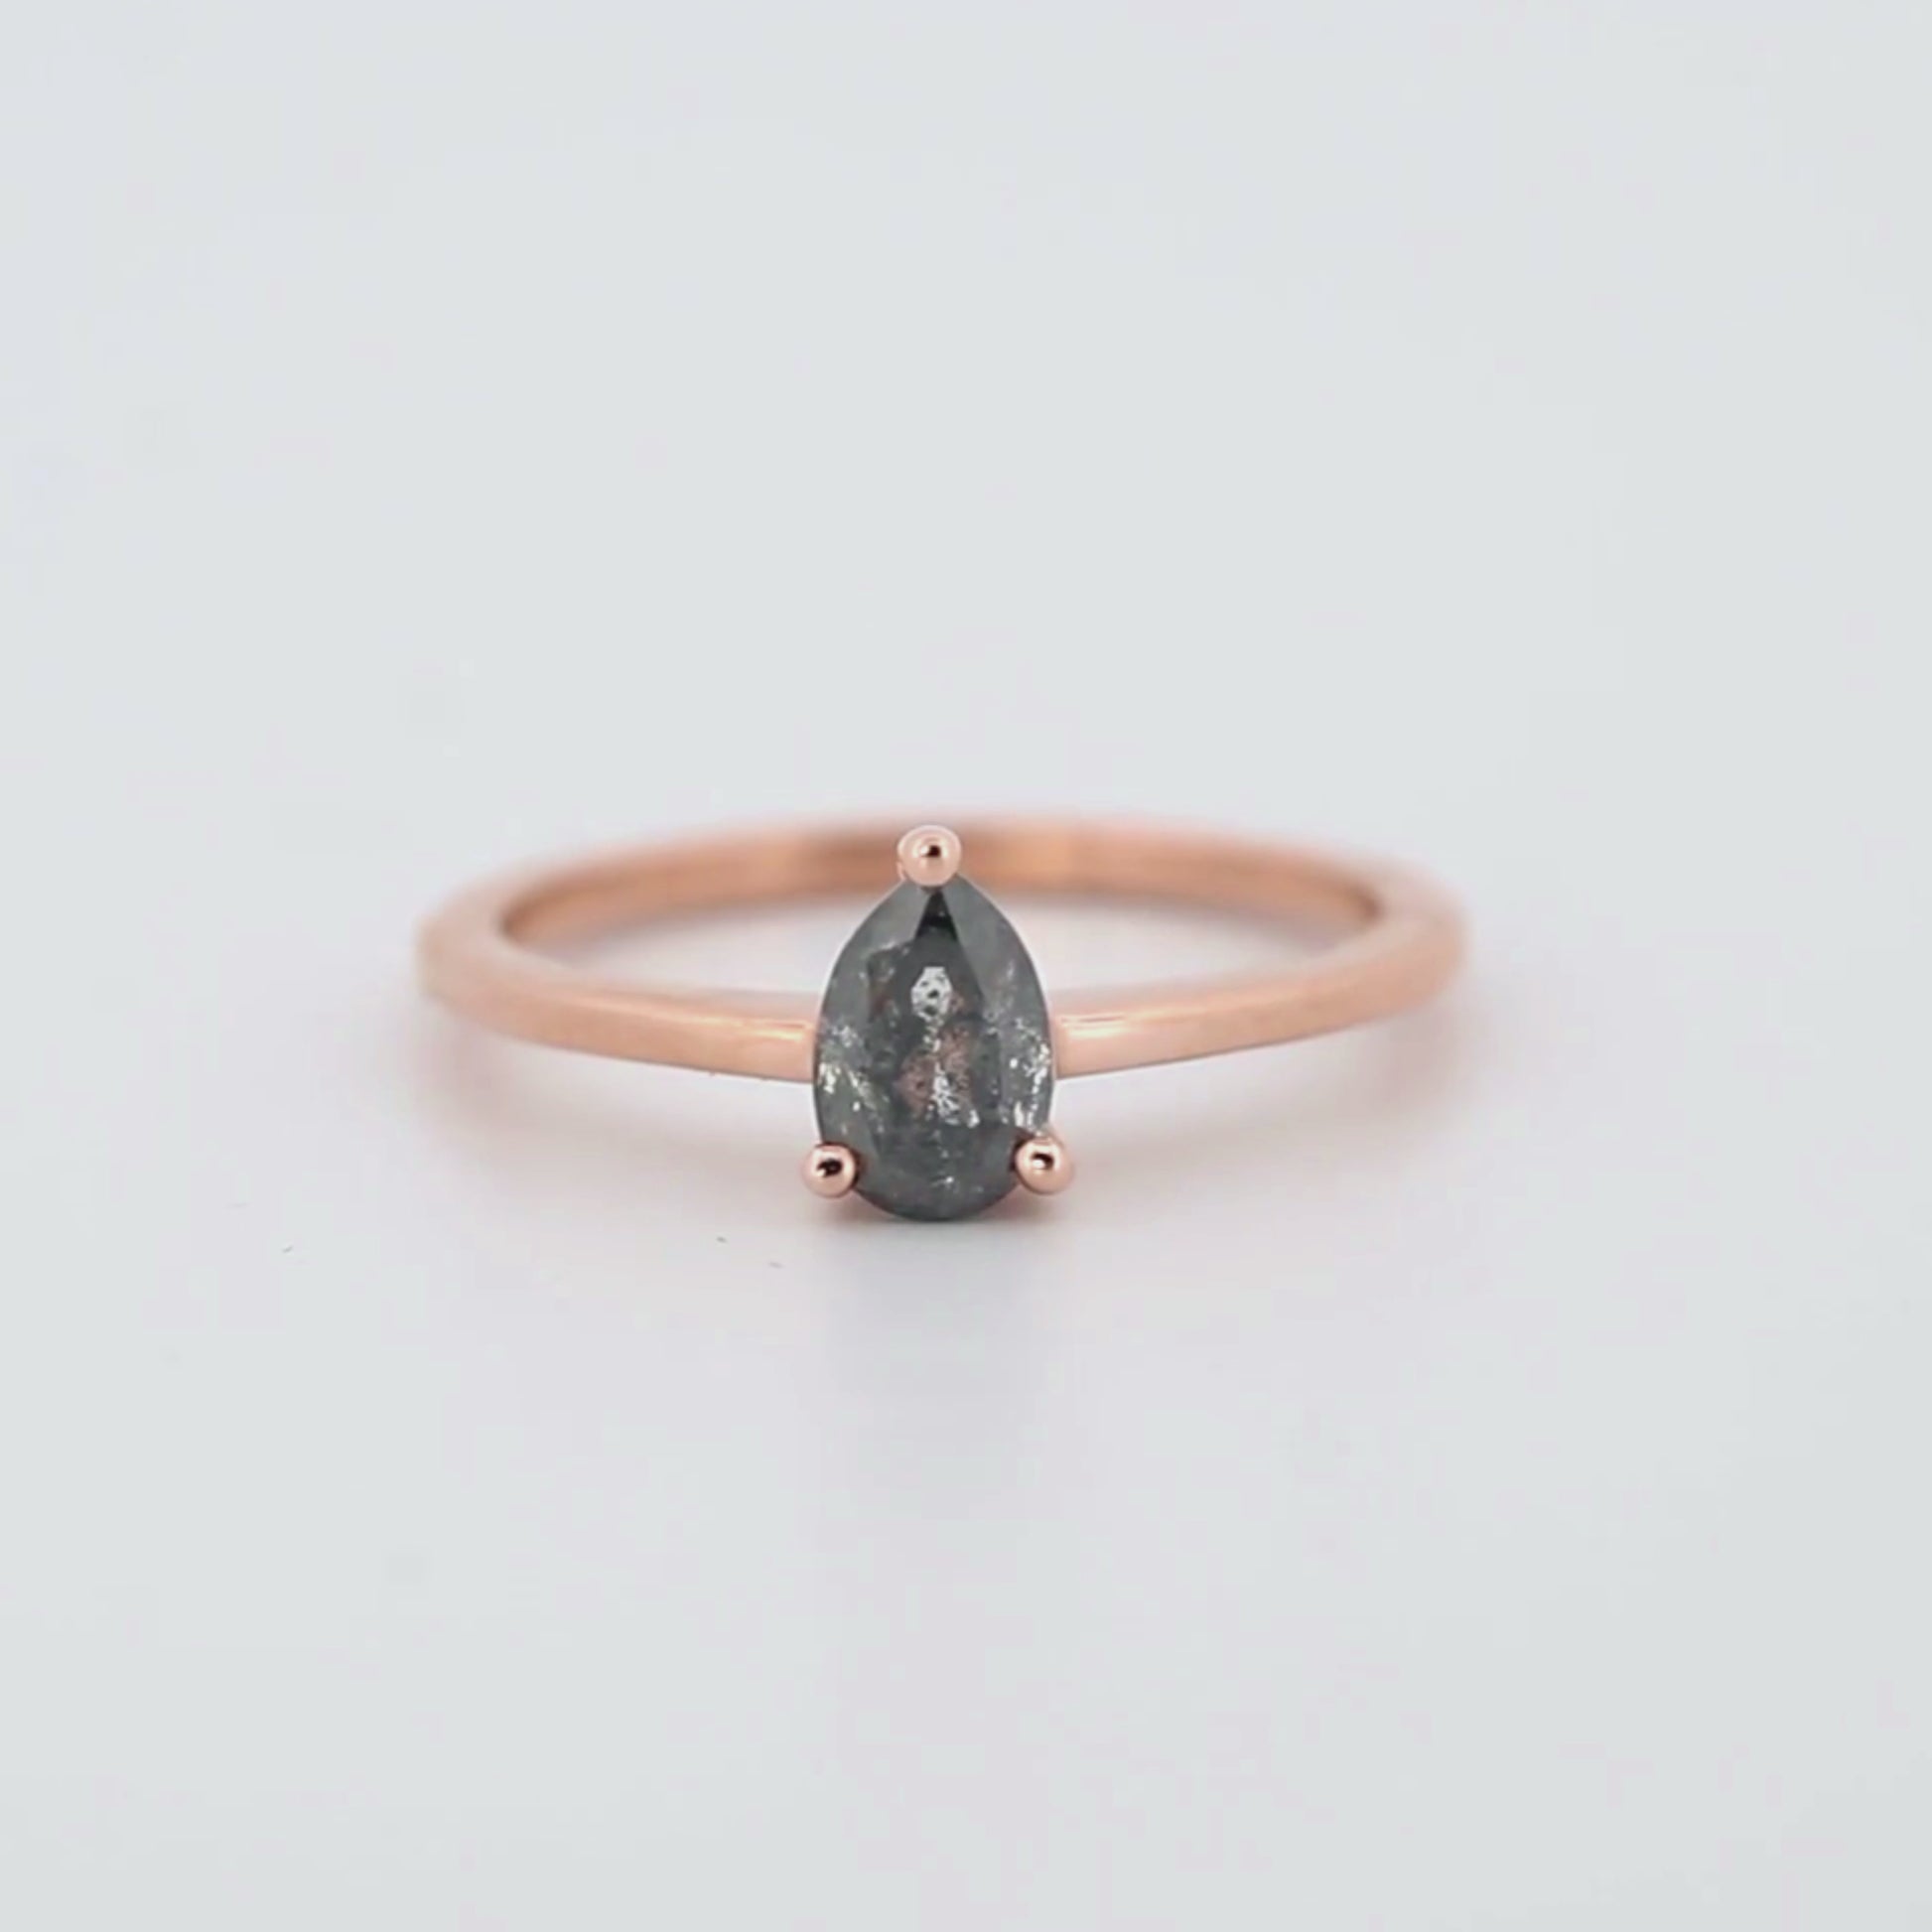 Ruthie Ring with a 0.77 Carat Dark and Clear Pear Salt and Pepper Diamond in 14k Rose Gold - Ready to Size and Ship